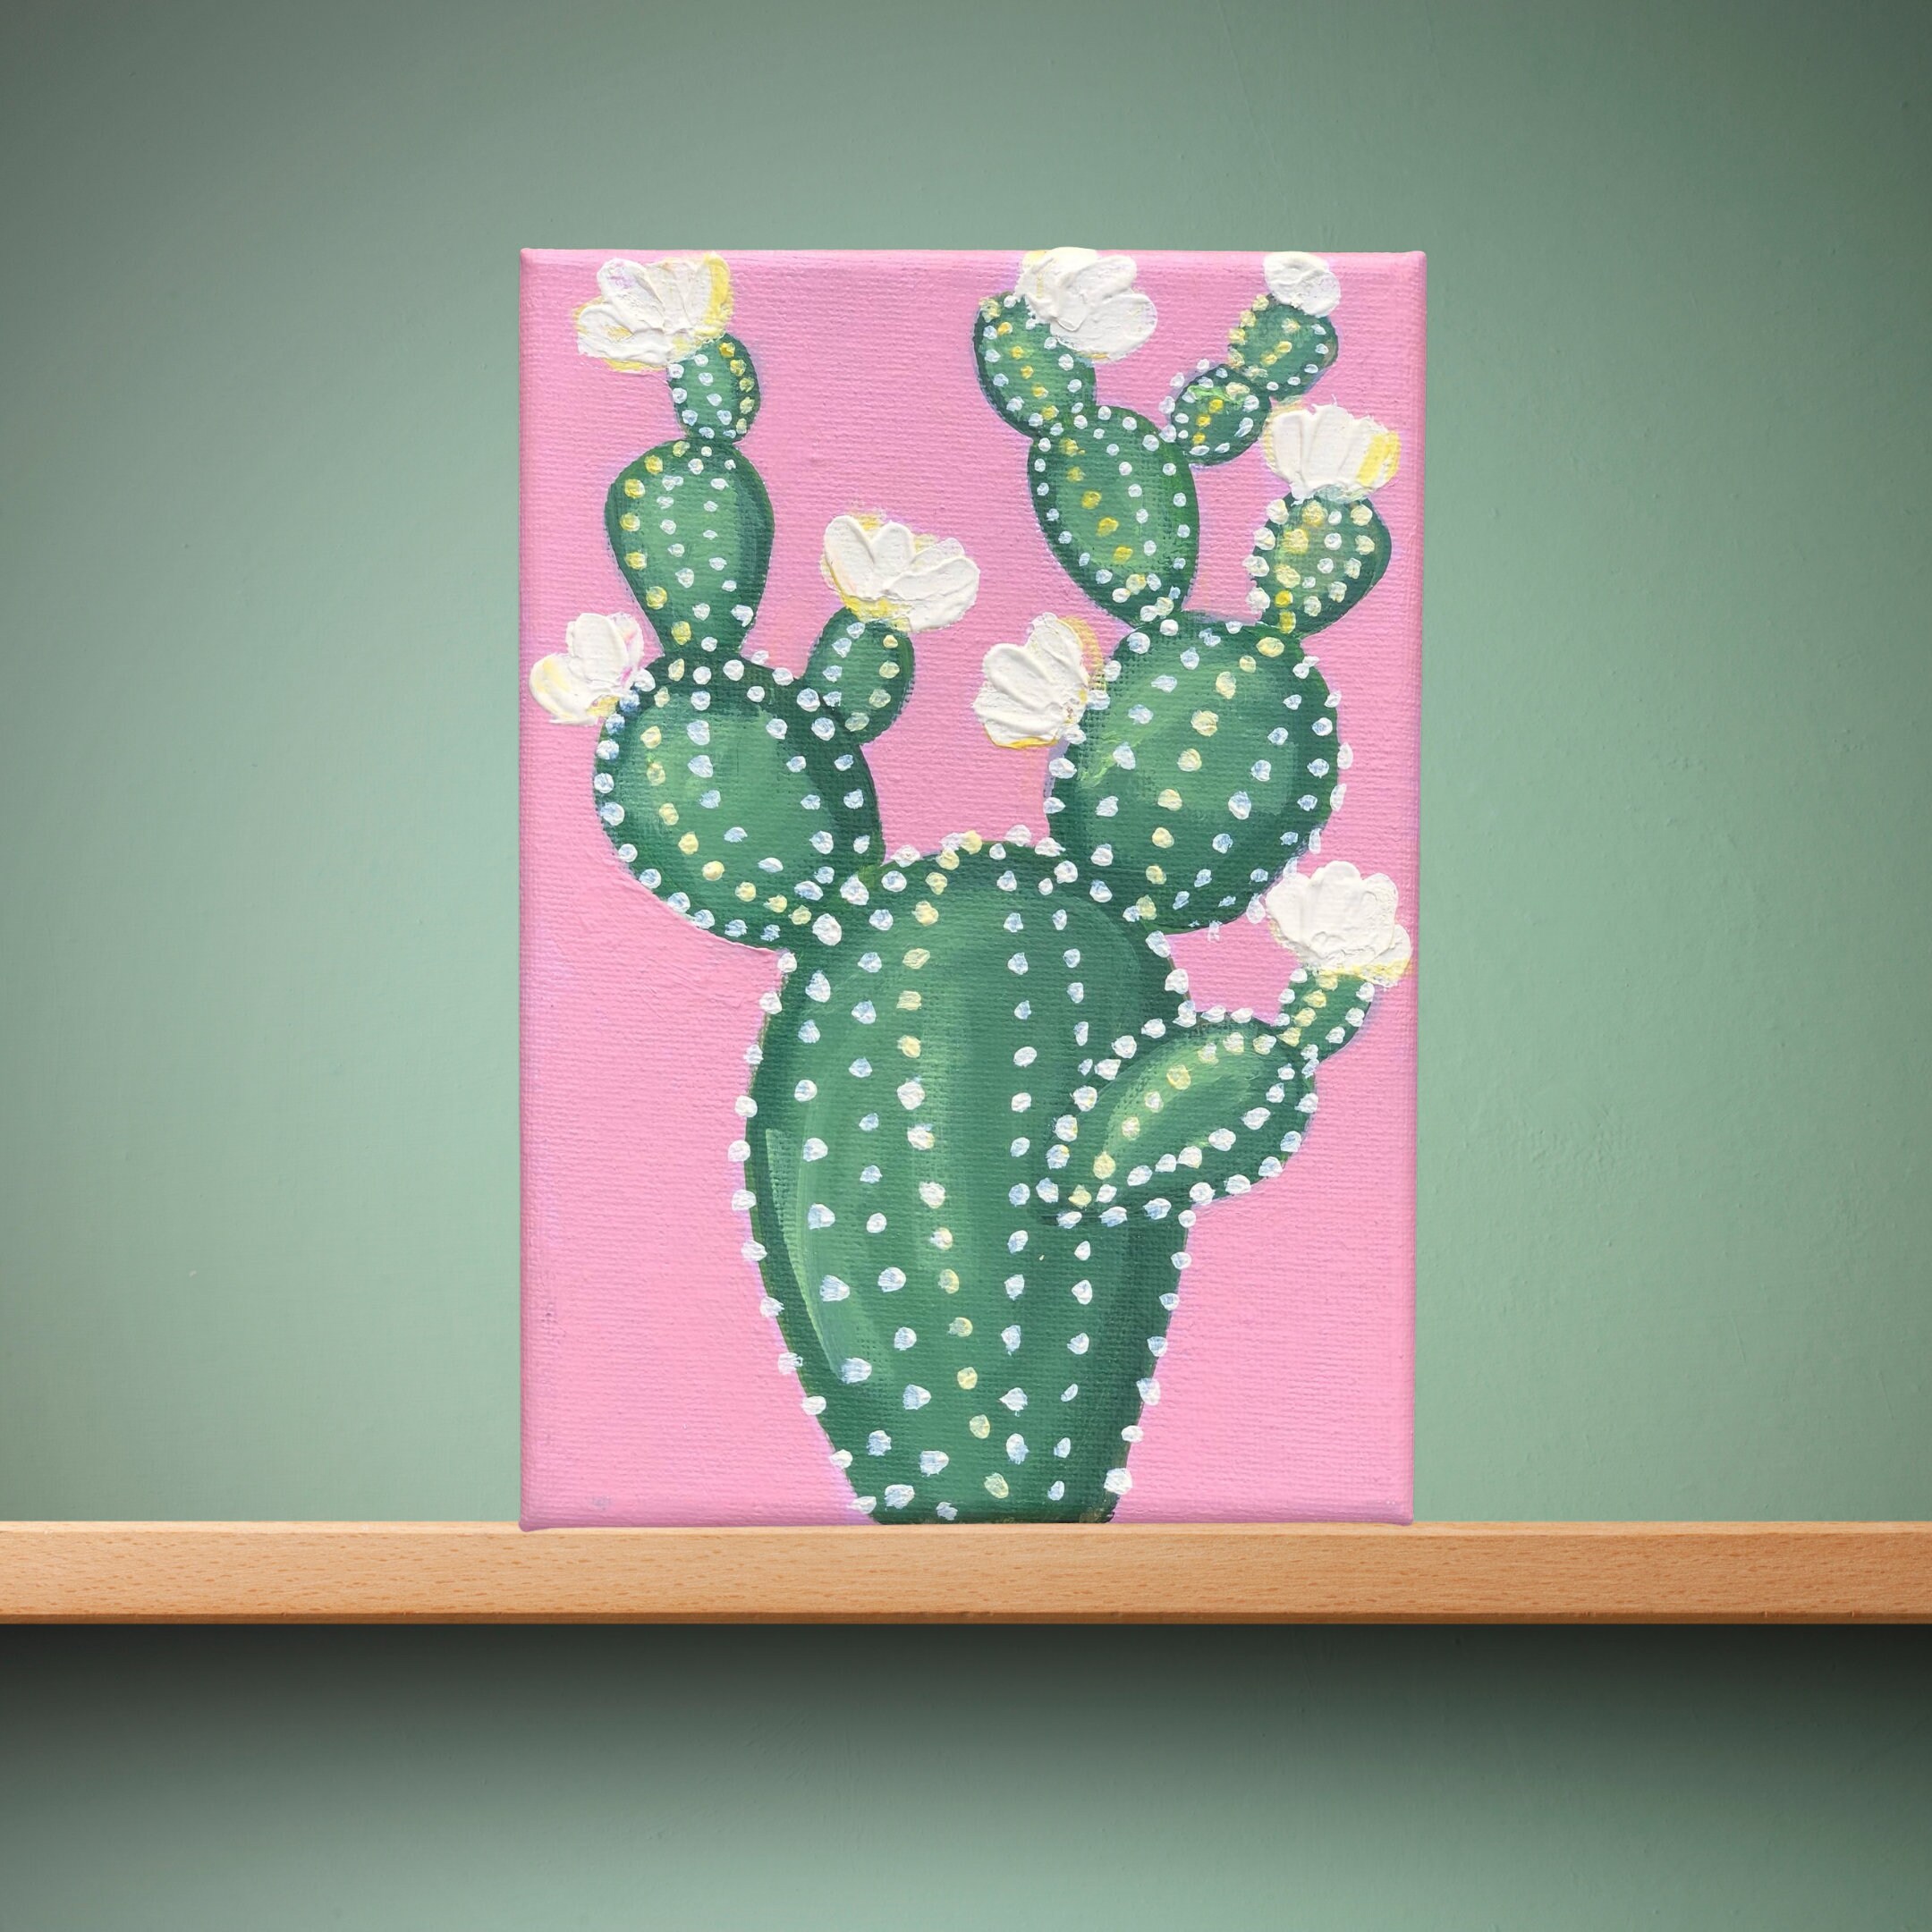 Funky Cactus MINI Painting Kit by the Brush Bar, Prickly Pear Paint Kit, Painting  Supplies, Southwest Art, Desert Painting 